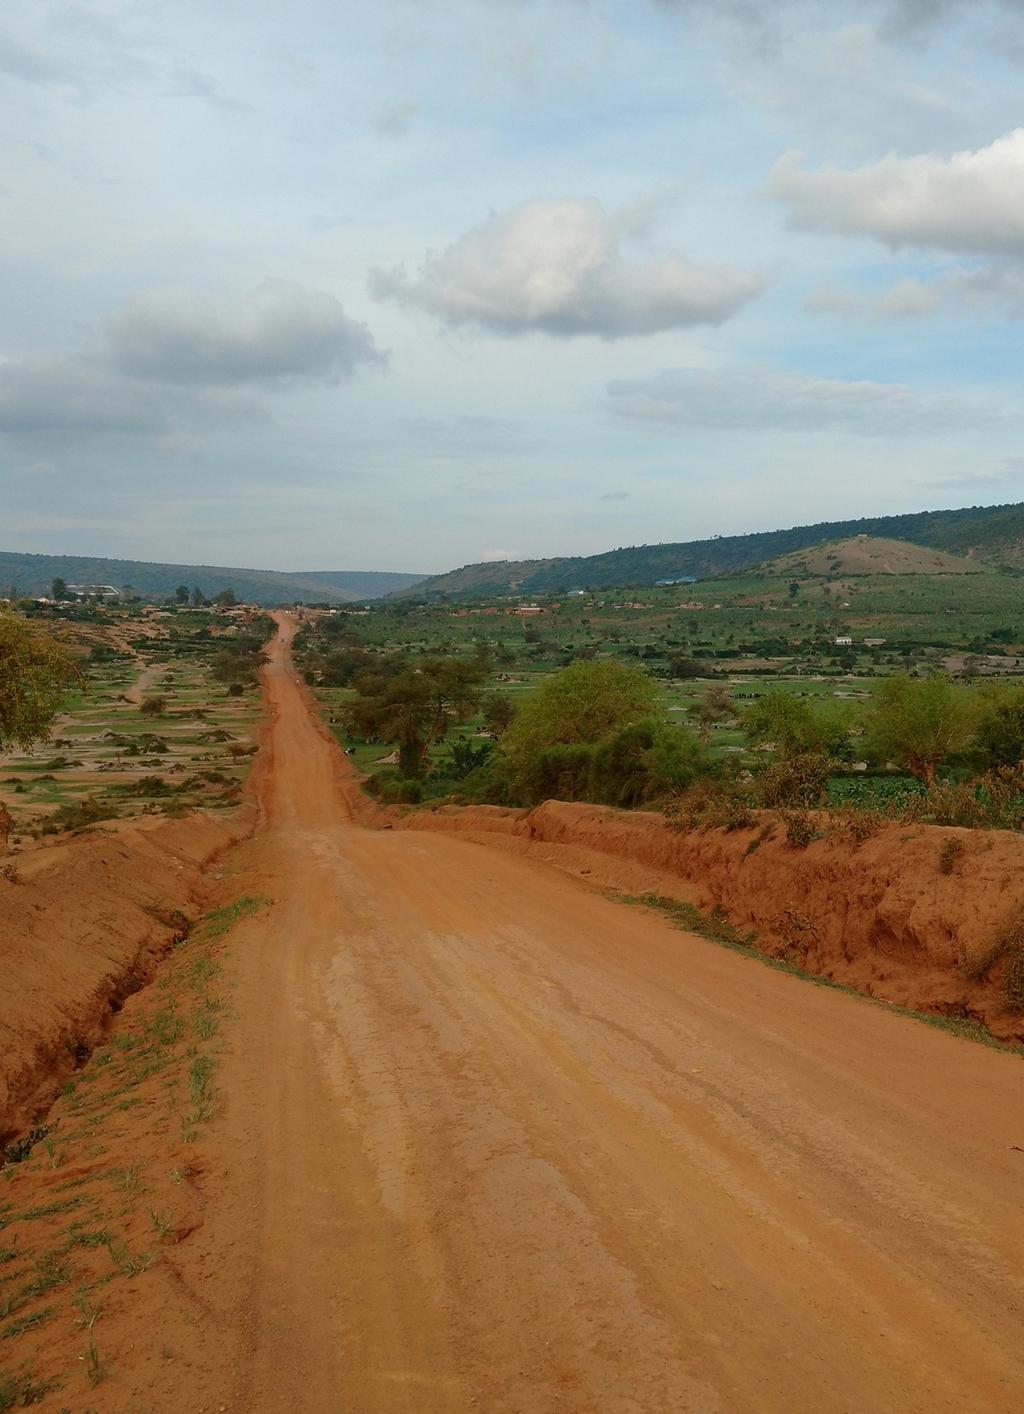 THE LONG ROAD TO NAKIVALE Home to more than 120,000 refugees, settlement receives new arrivals from neighboring countries such as Democratic Republic of Congo, Burundi, Rwanda, and South Sudan on a